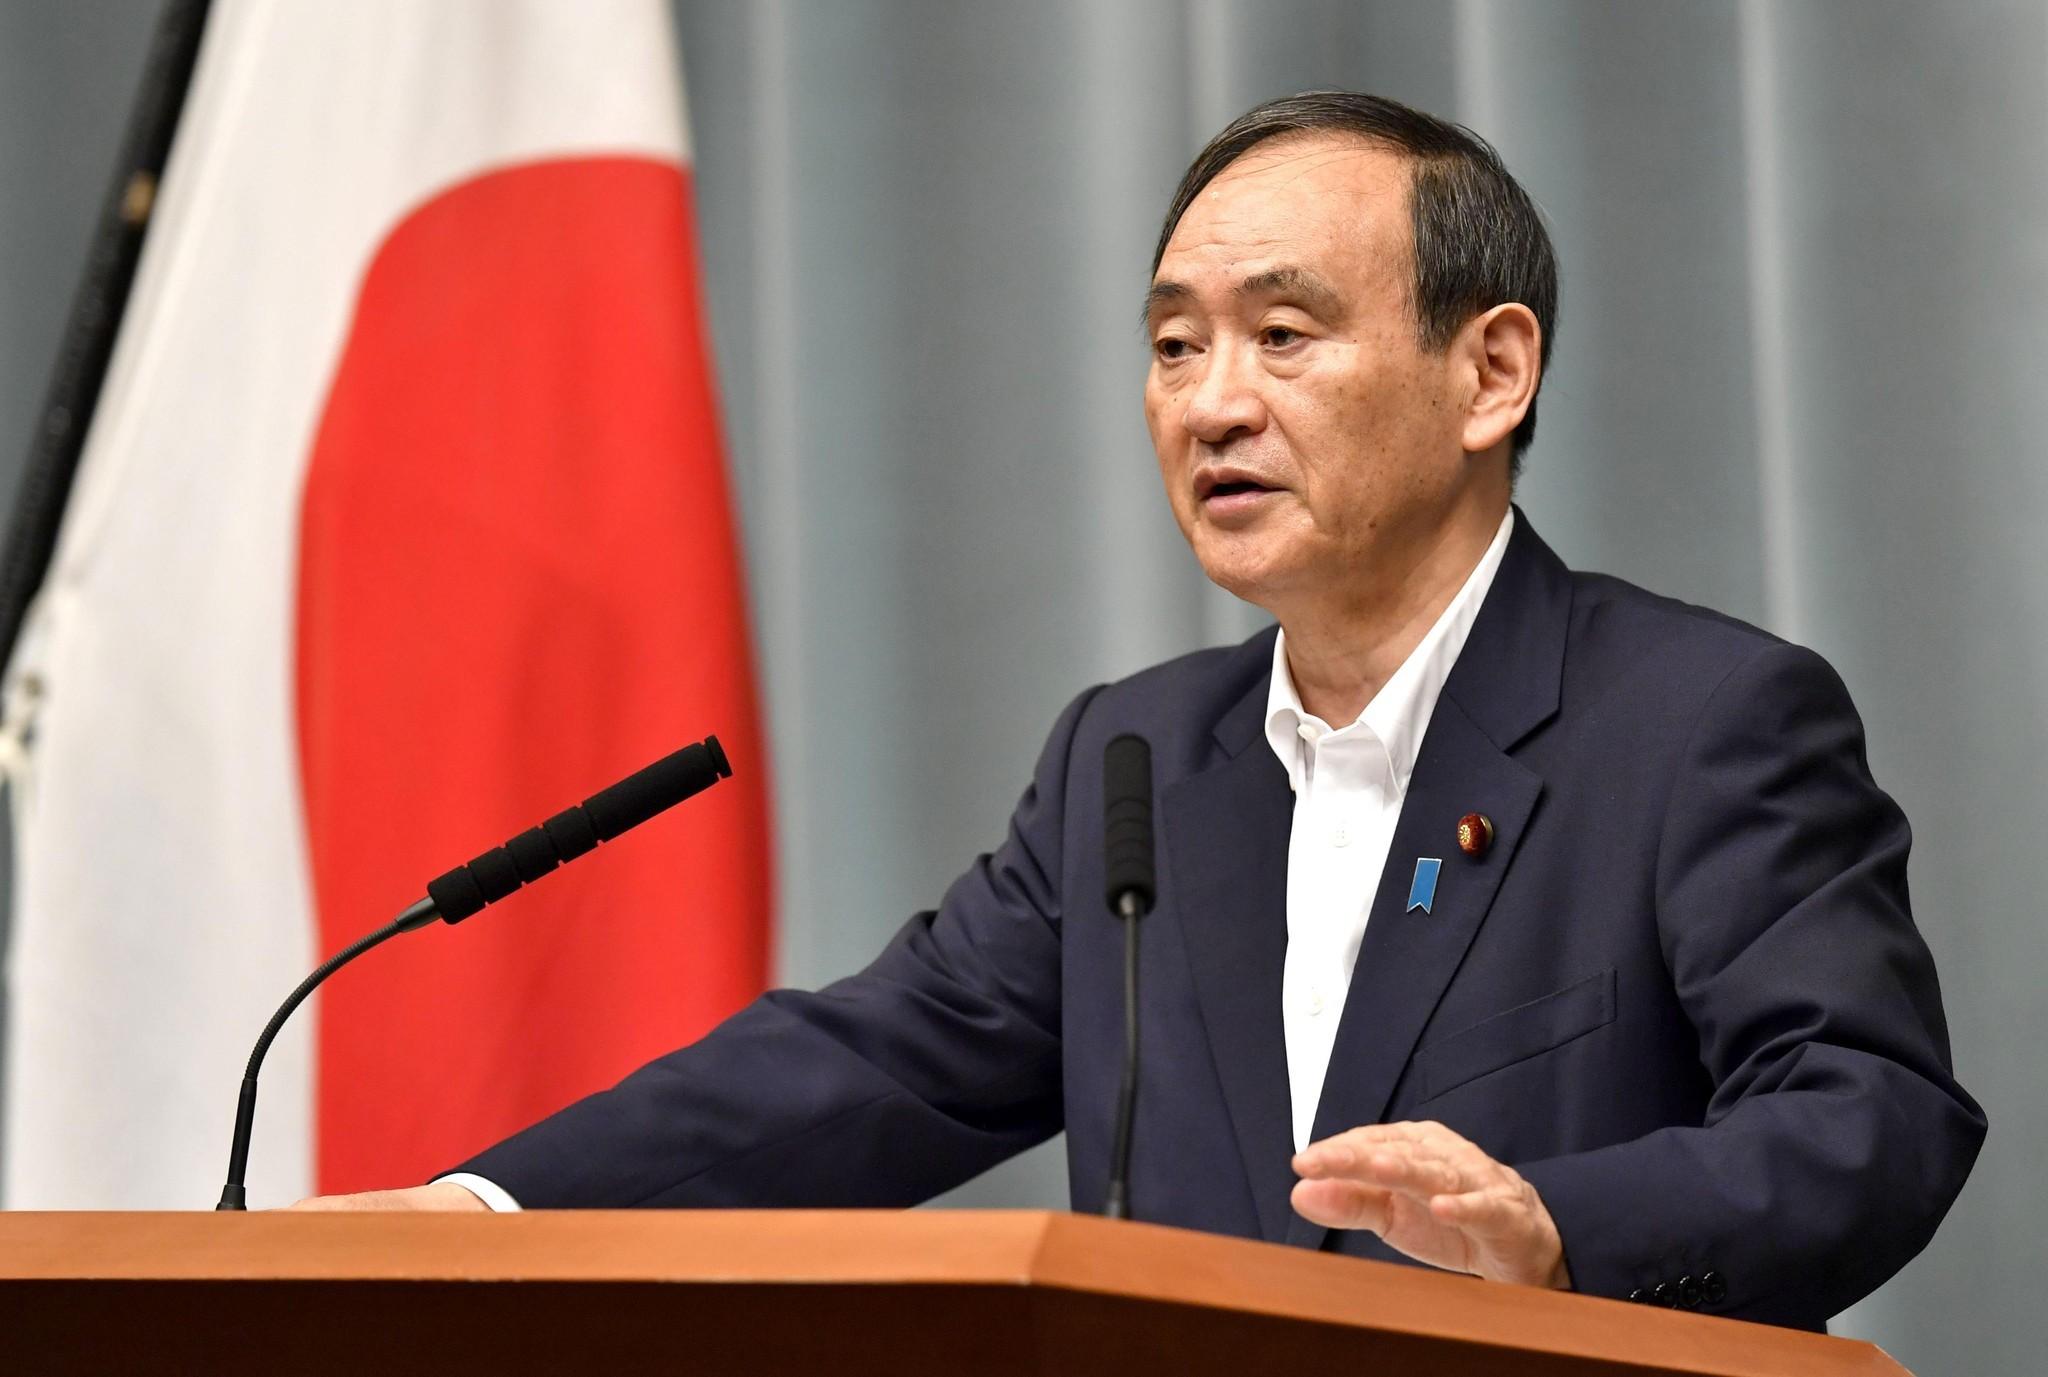 The Japanese government announced: Prime Minister Yoshihide Suga will visit the United States from April 15th to 18th